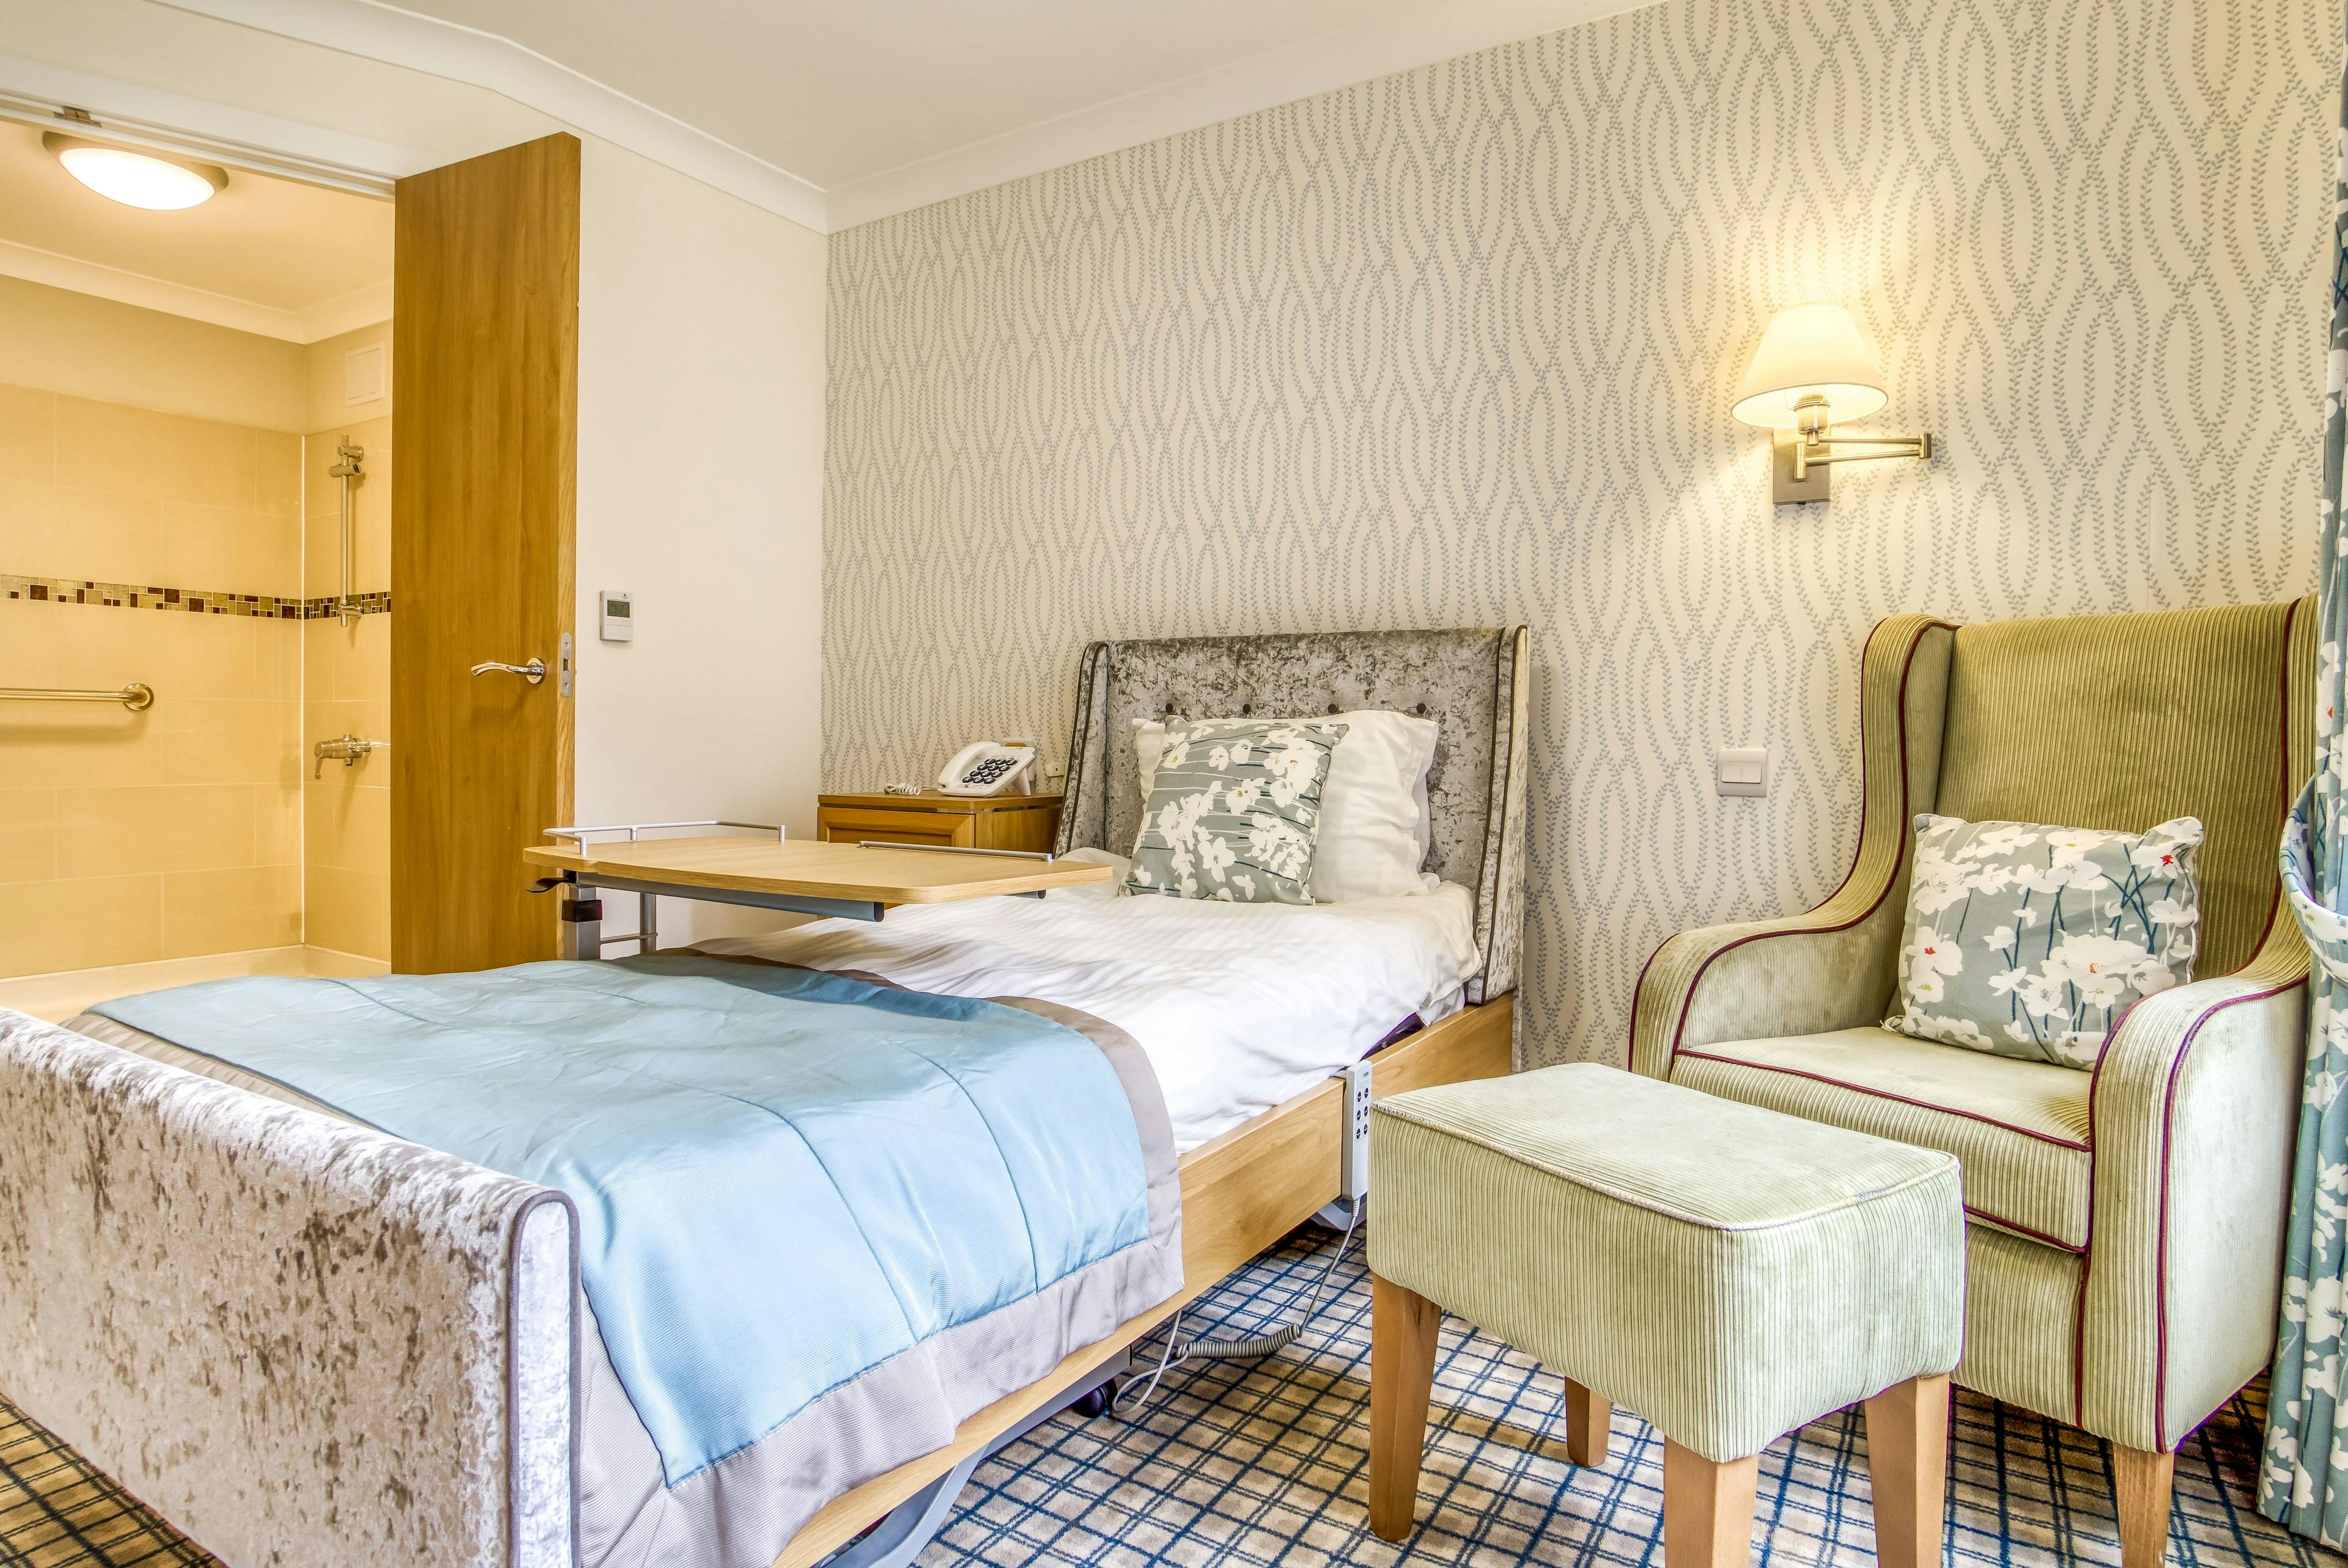 Bedroom of Wood Norton care home in Evesham, Worcestershire